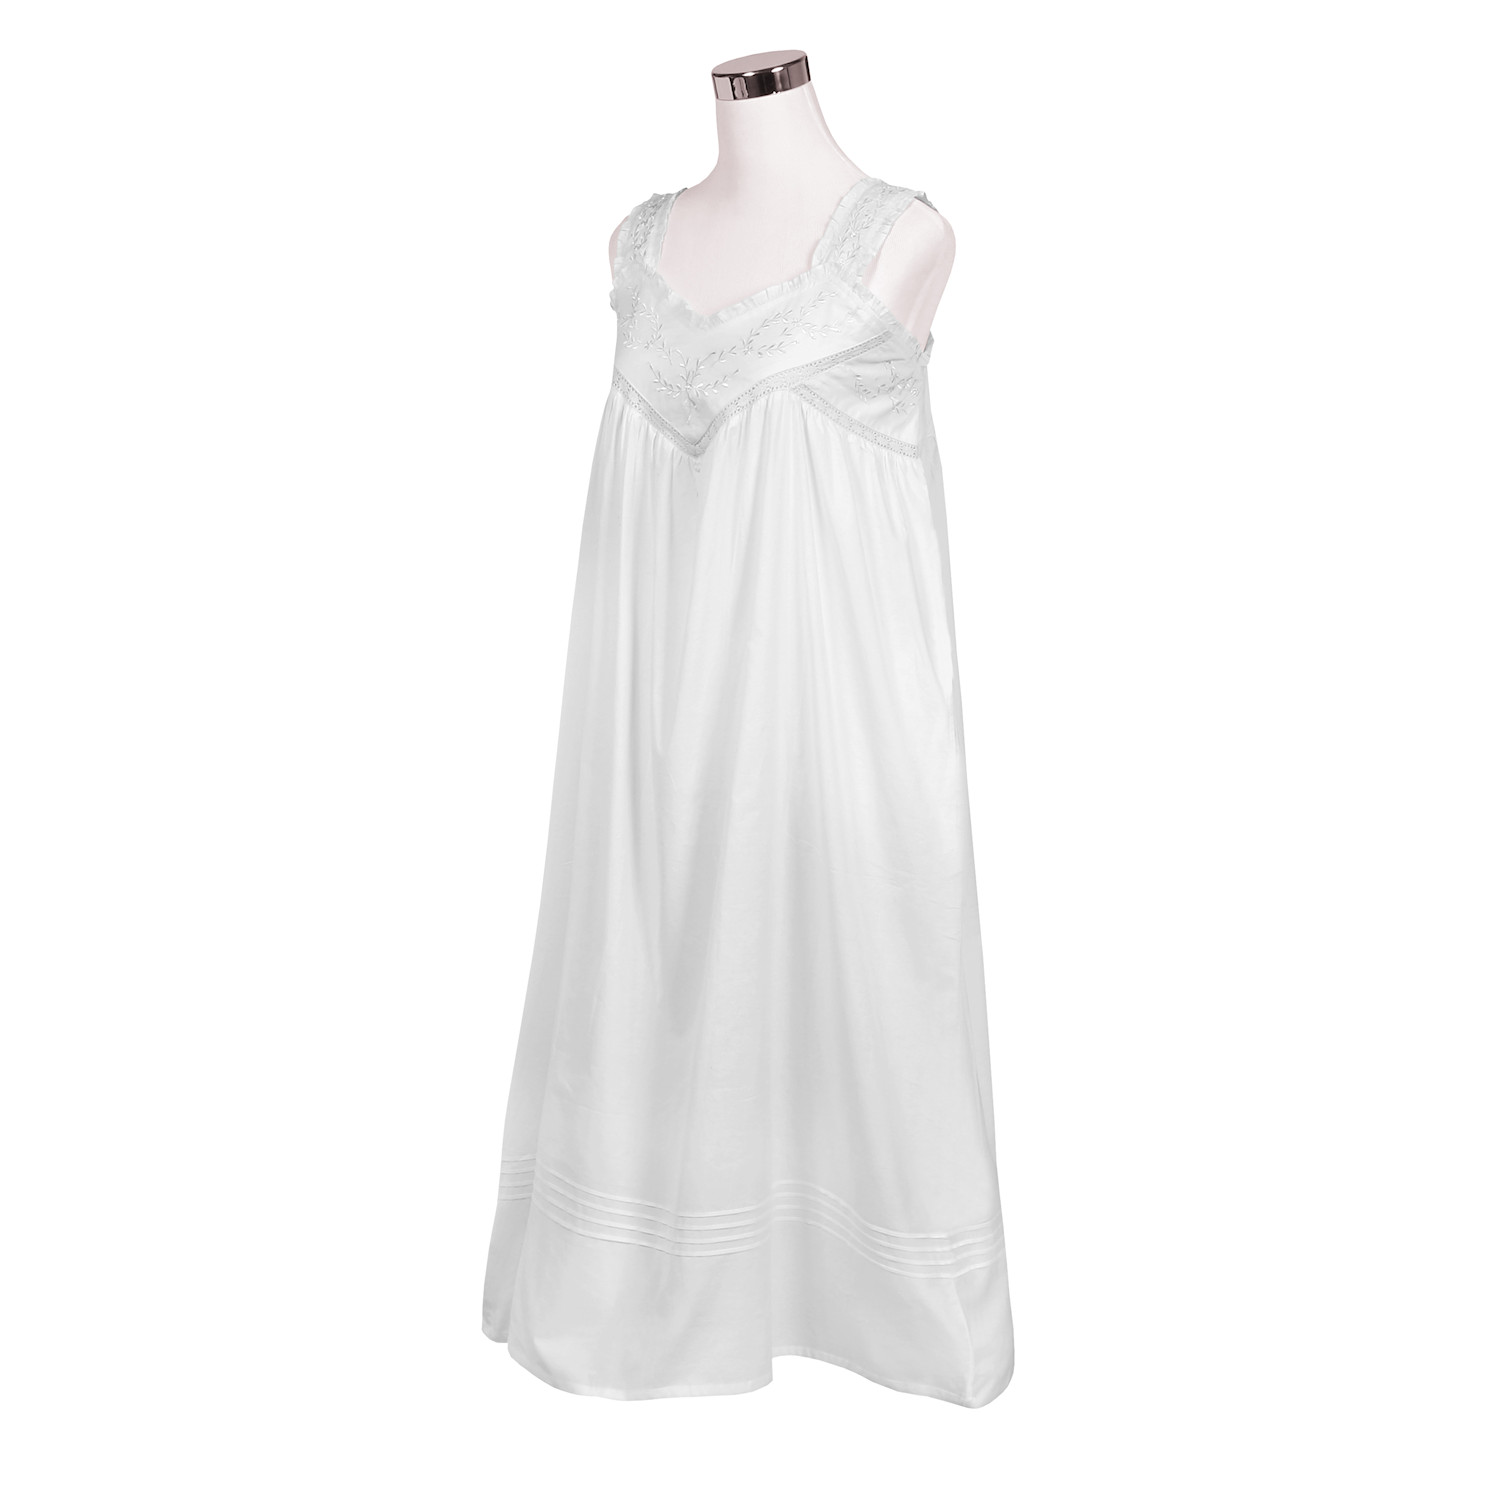 Floriana Womens Floral Embroidered Nightgown - Sleeveless Cotton ...